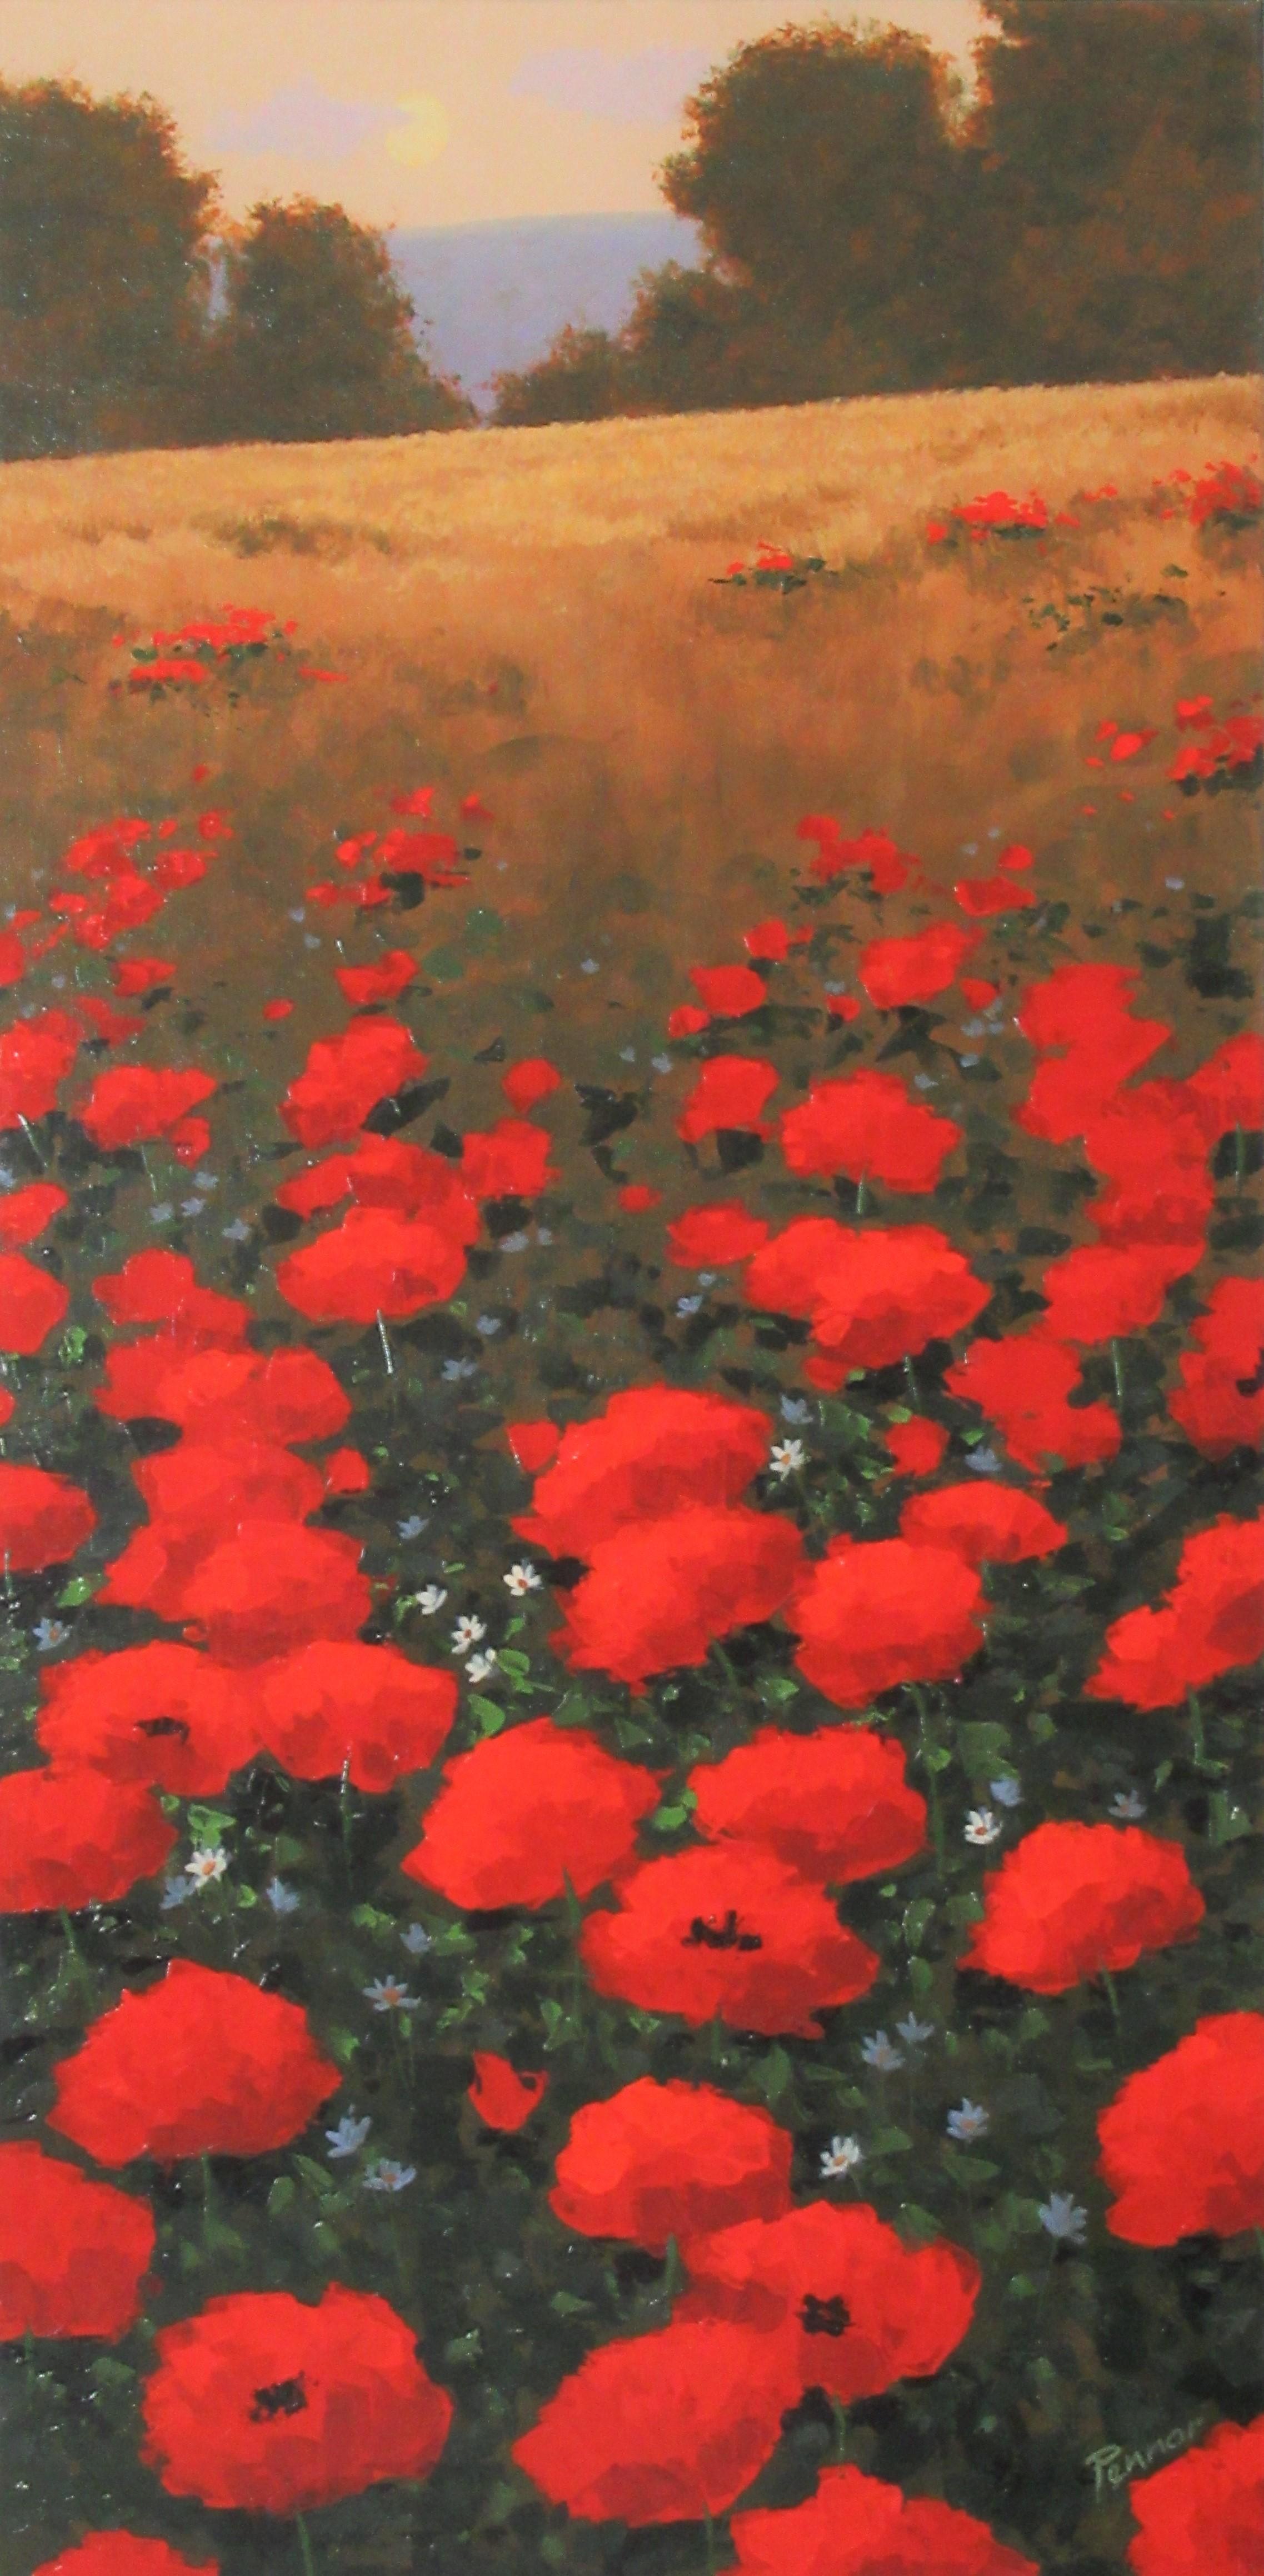 Robert Pennor Landscape Painting - Bright Red Poppies, Original Painting